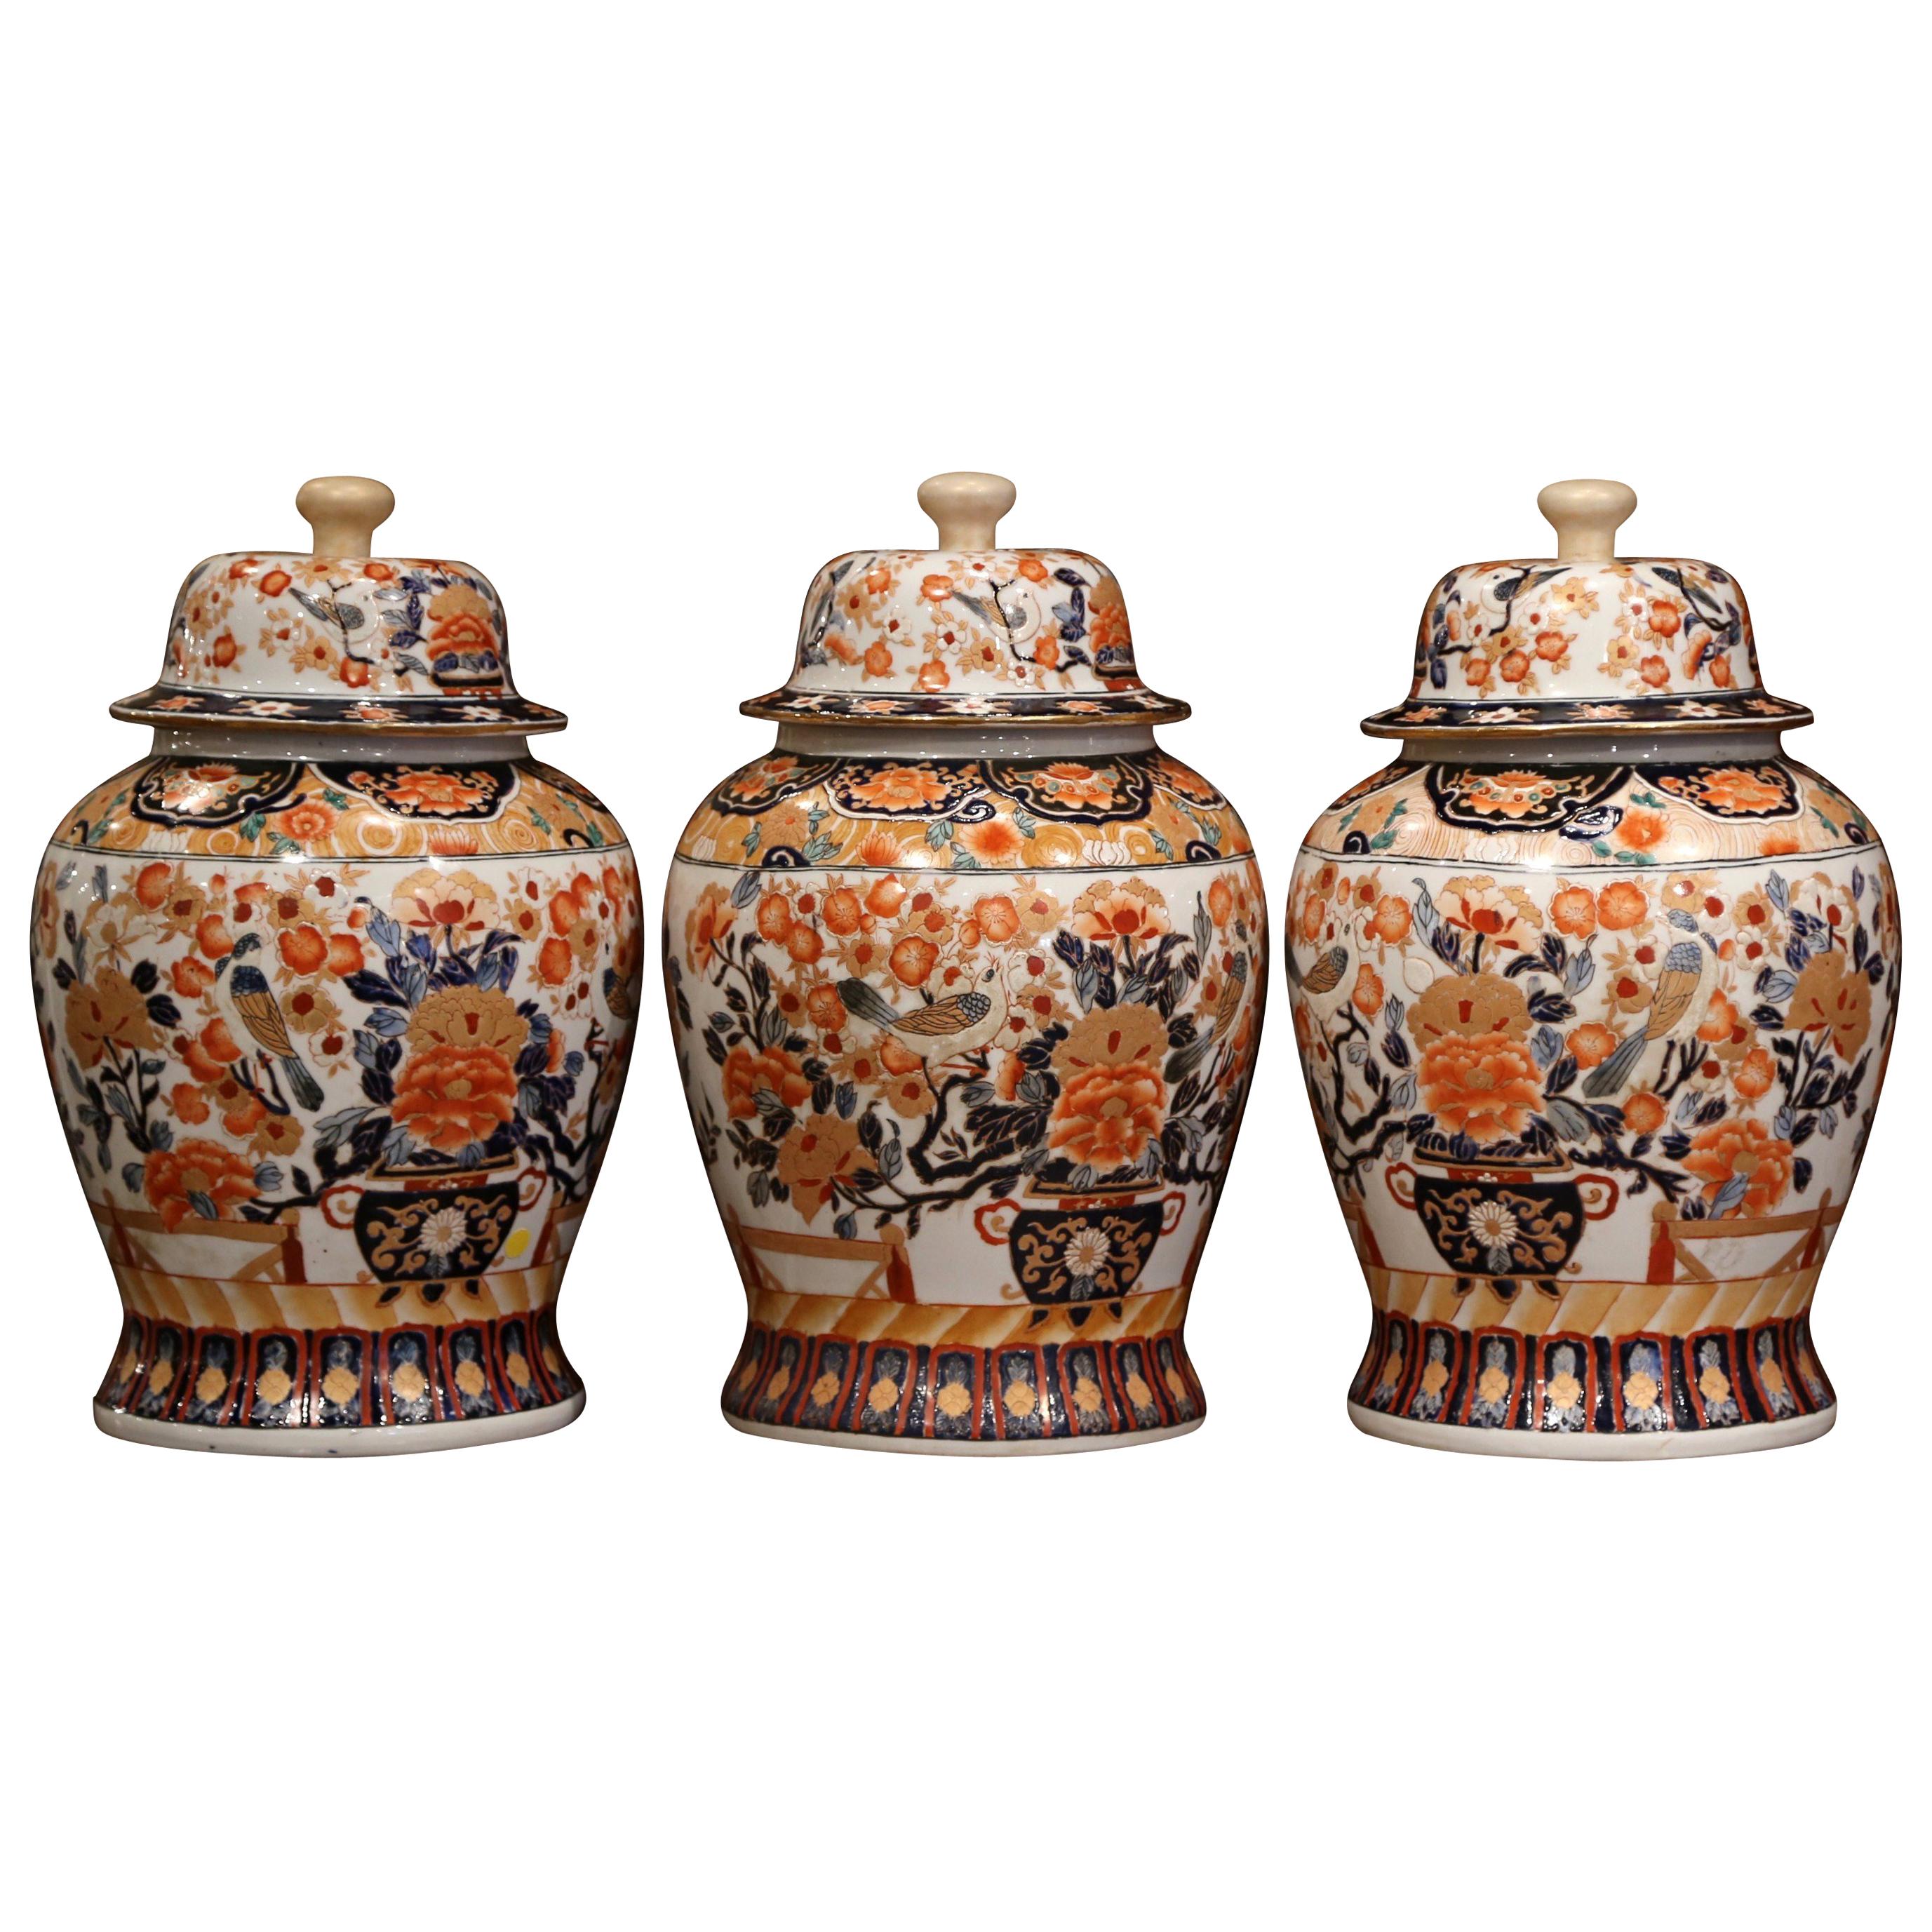 Set of Three Early 20th Century, Chinese Export Porcelain Ginger Jars with Lids